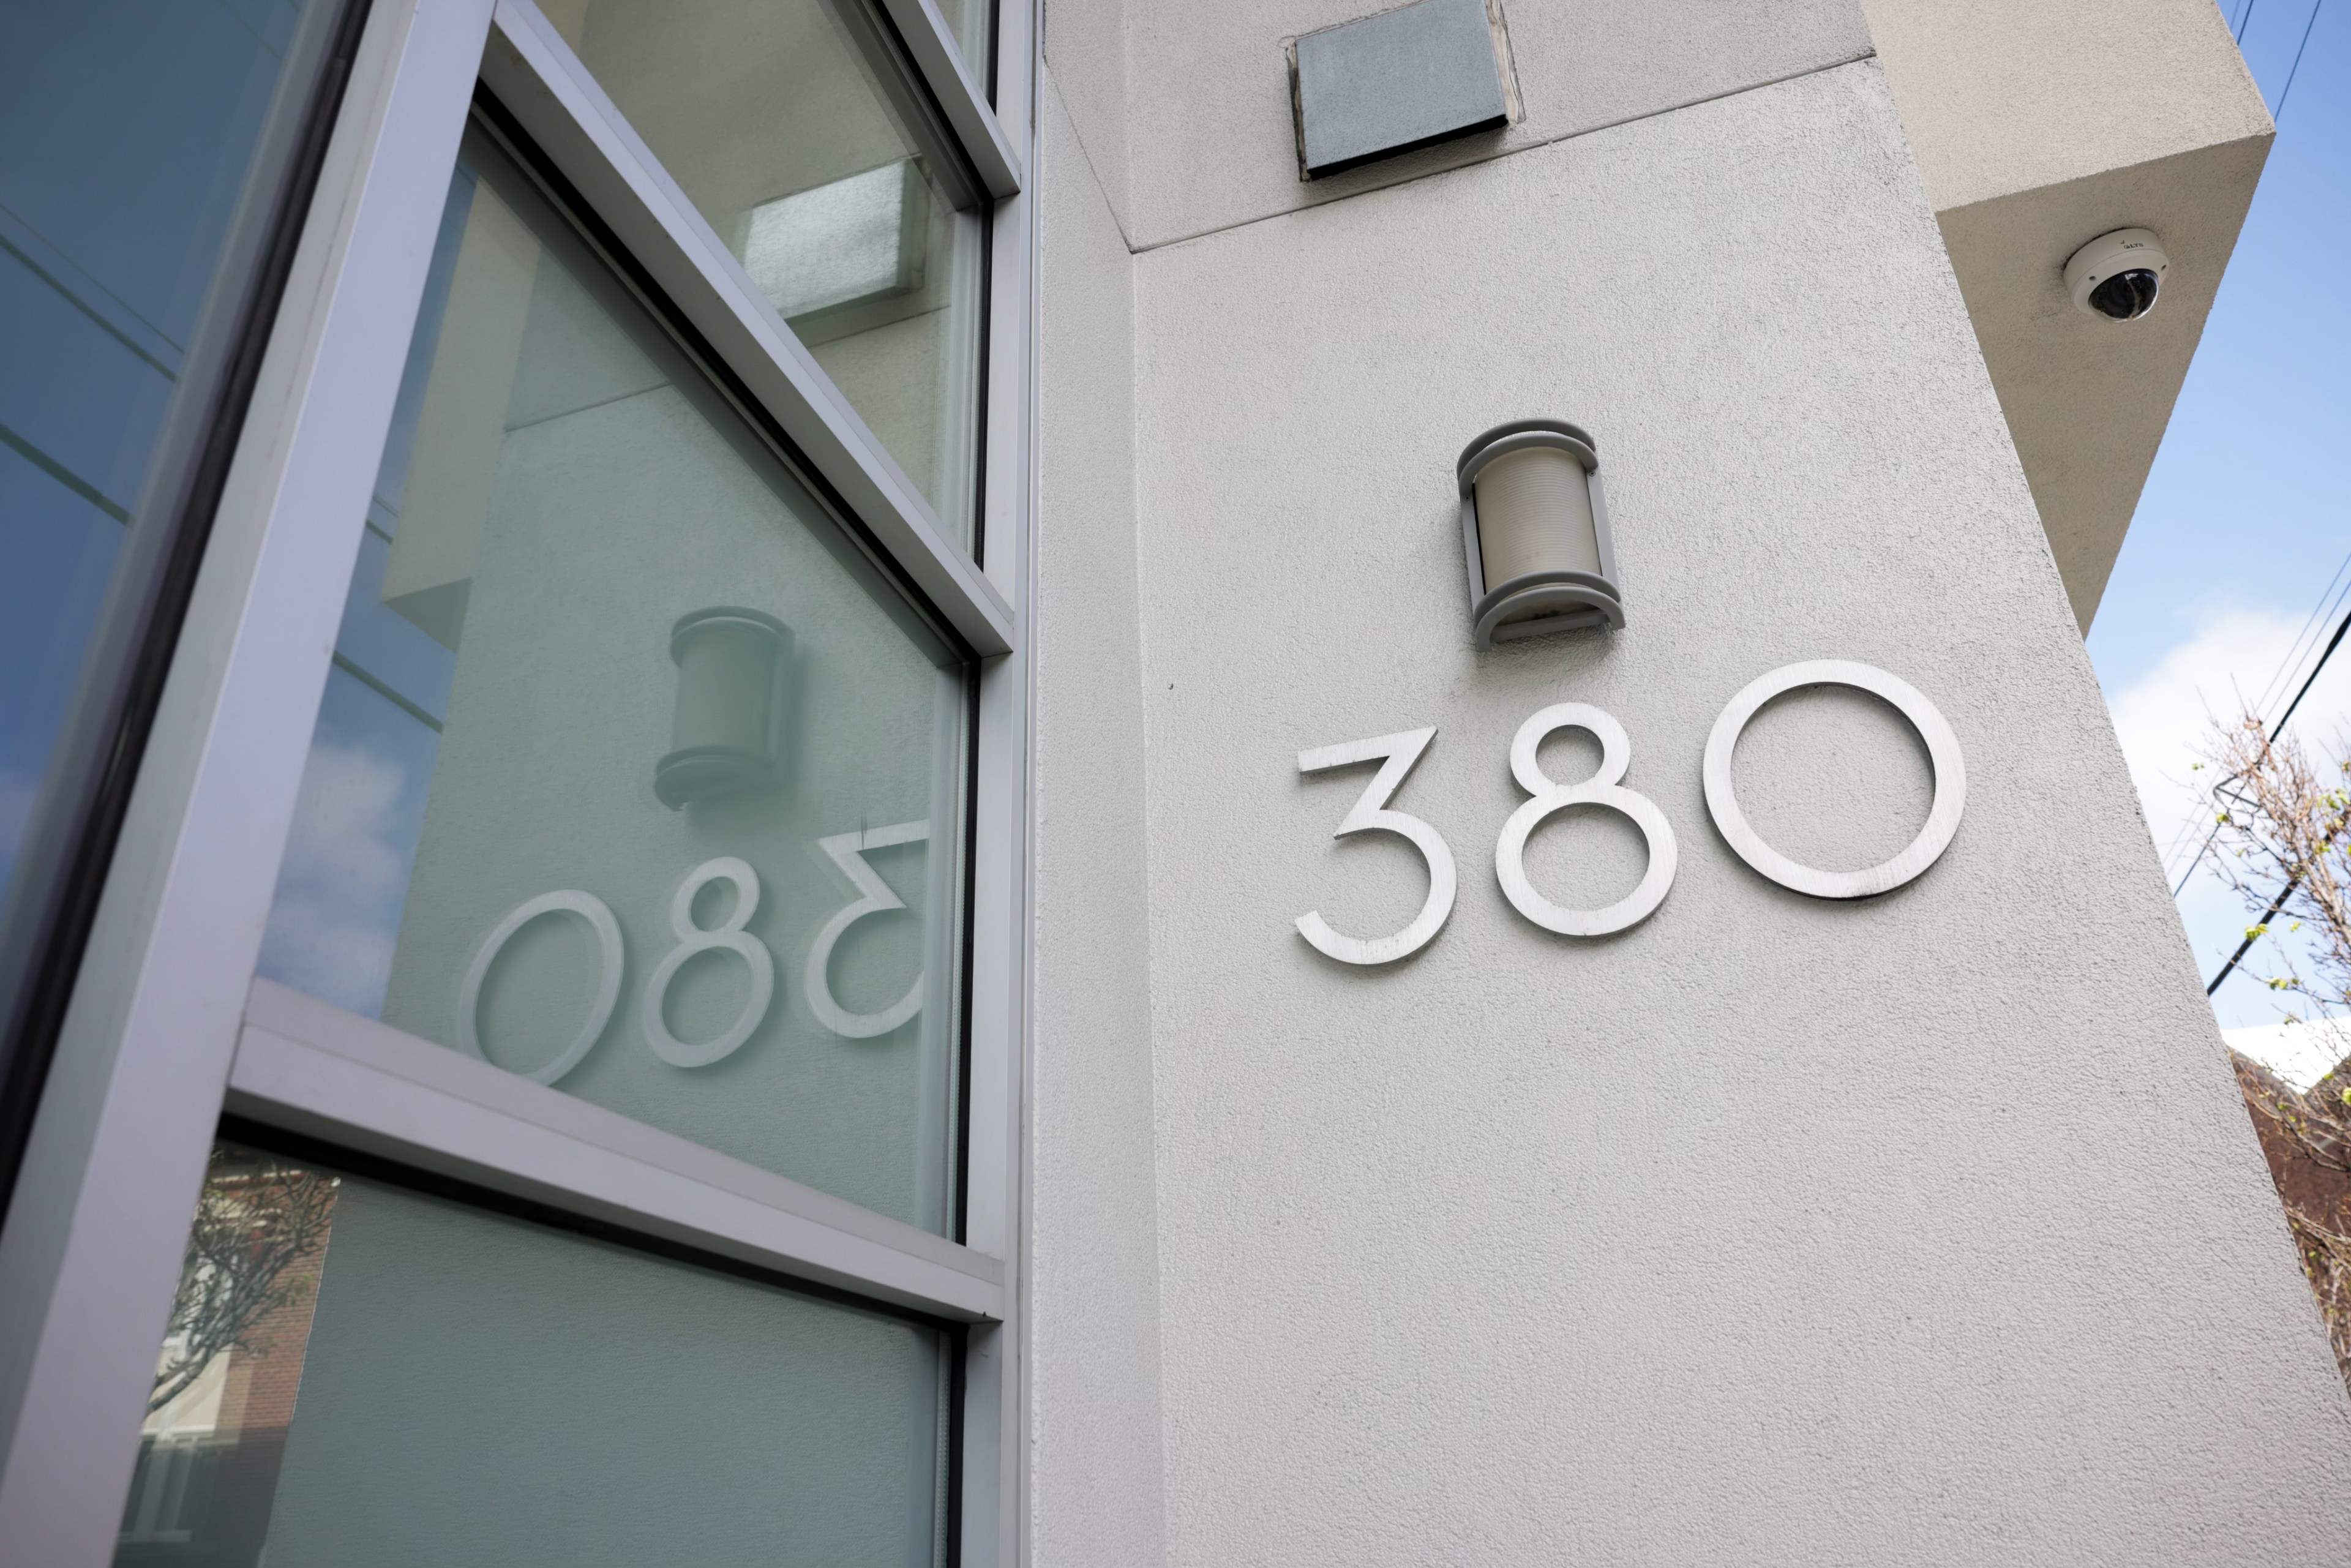 The image shows a modern building corner with the number &quot;380&quot; on the wall. A light fixture is mounted above the number, and a reflection is seen in a nearby window.